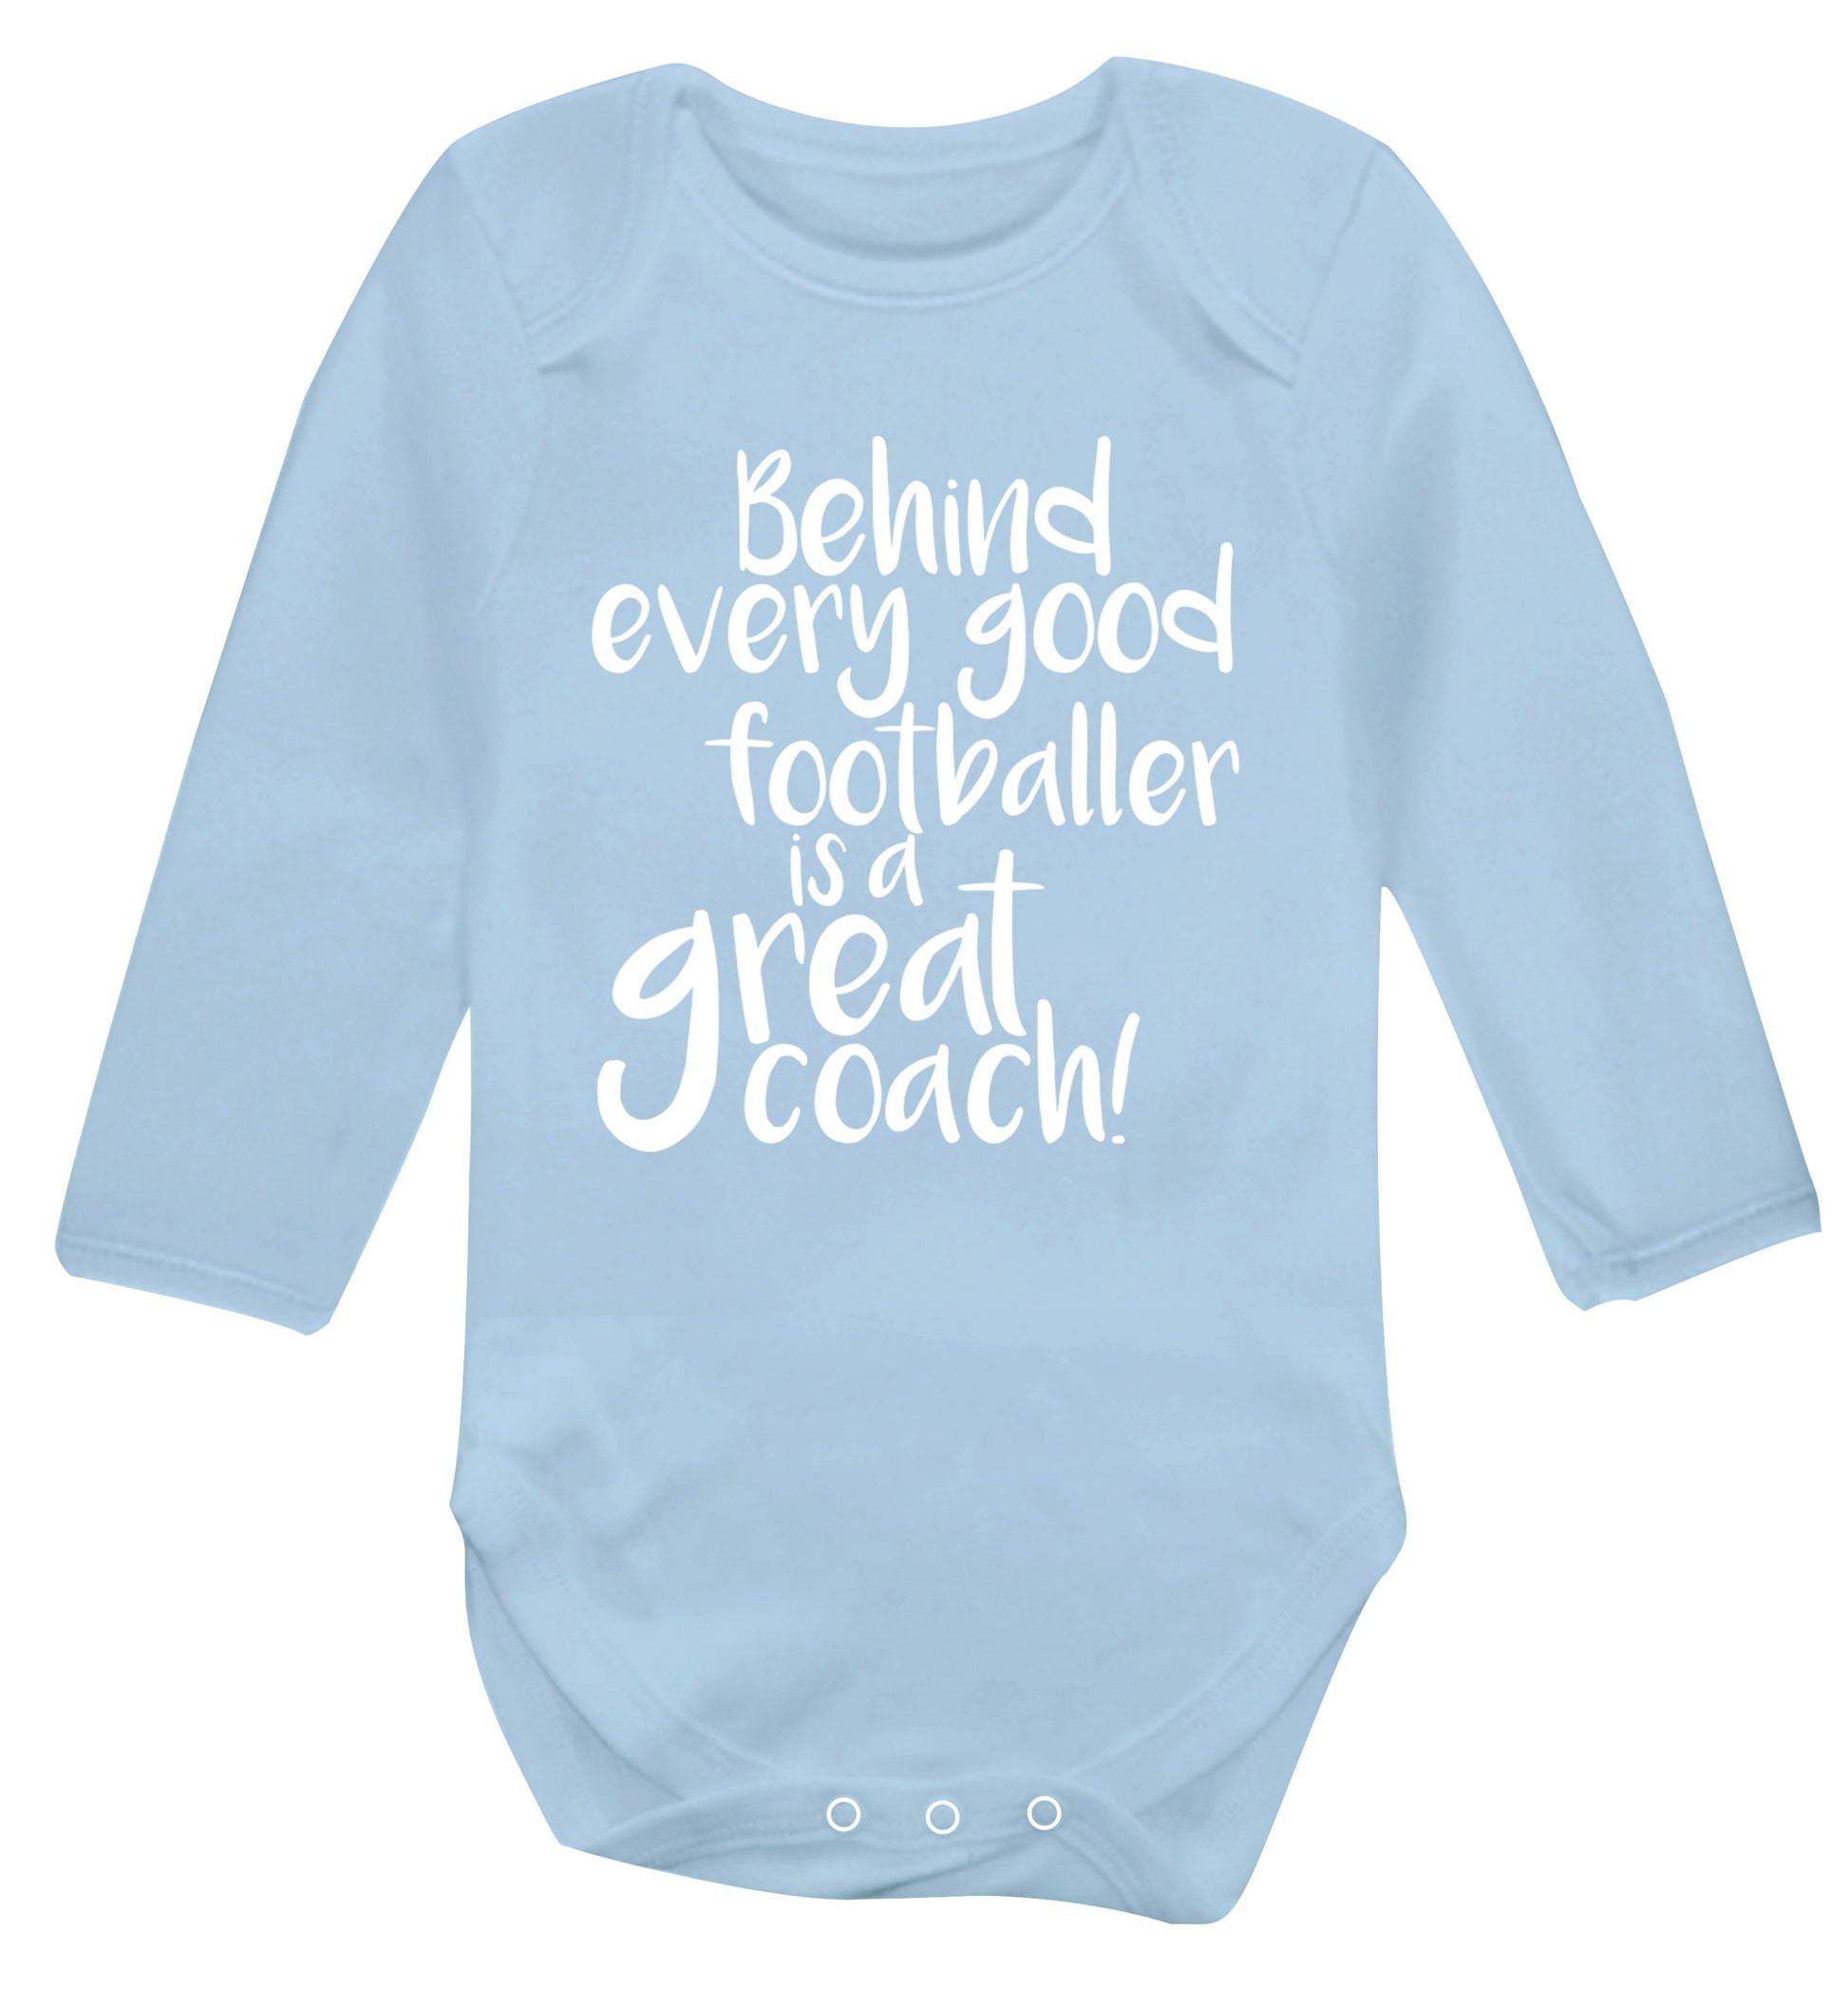 Behind every good footballer is a great coach! Baby Vest long sleeved pale blue 6-12 months